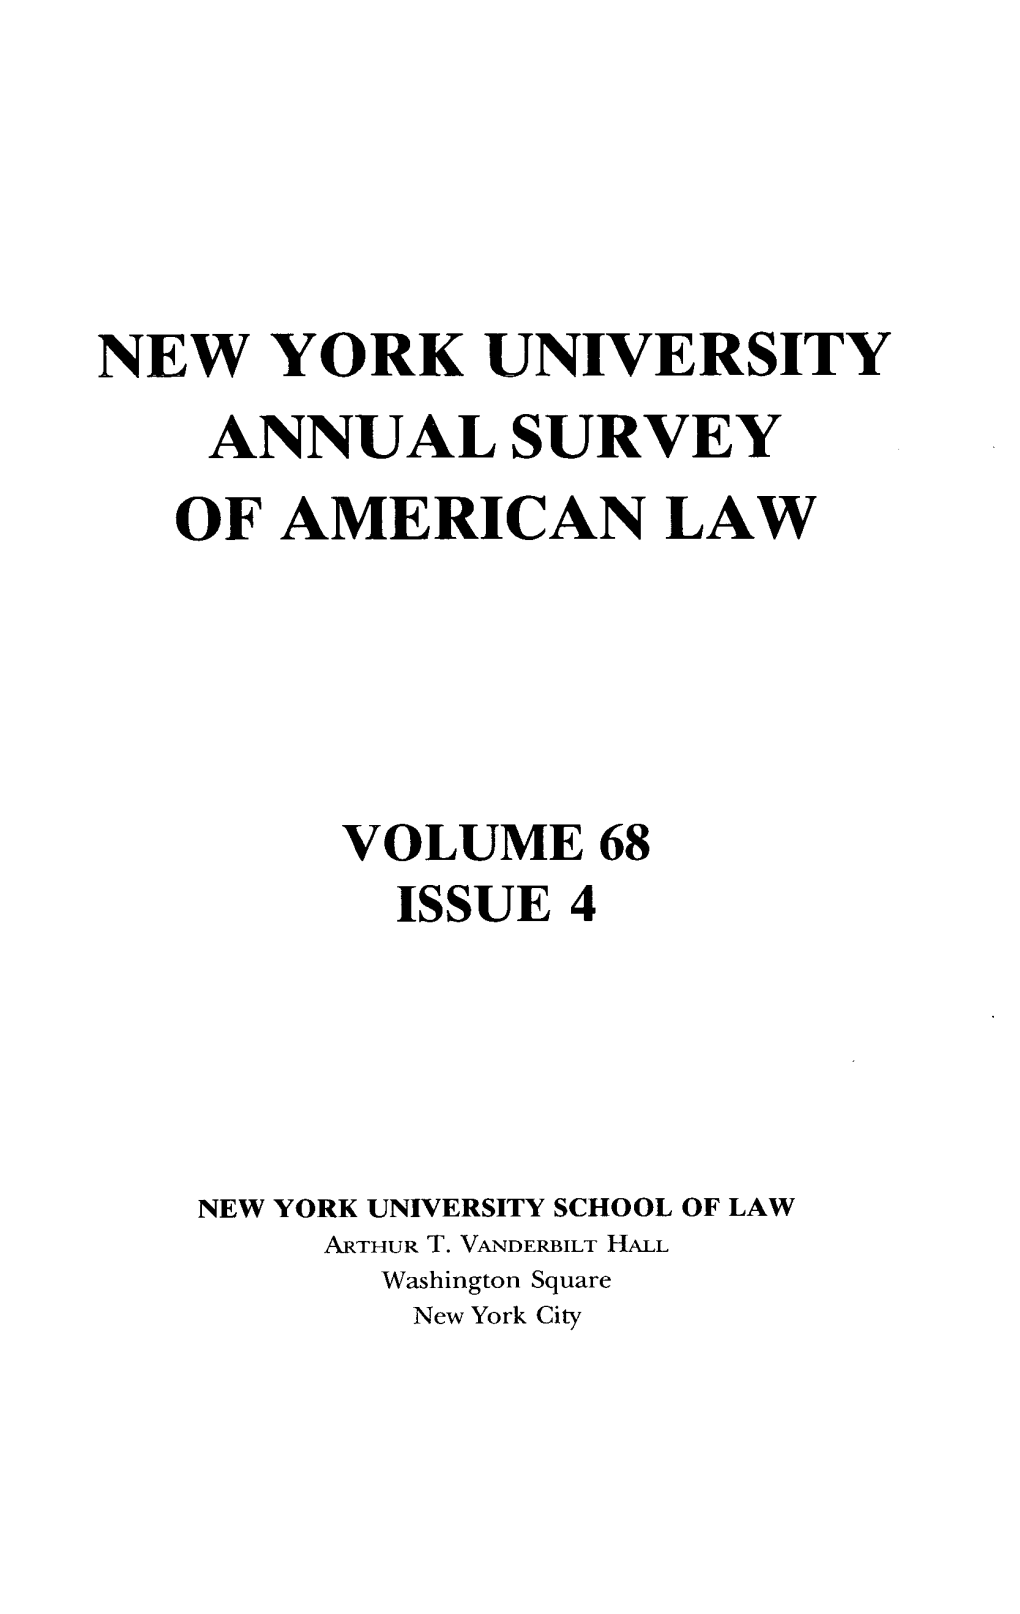 Hereof, Please Address Your Written Request to the New York University Annual Survey of American Law